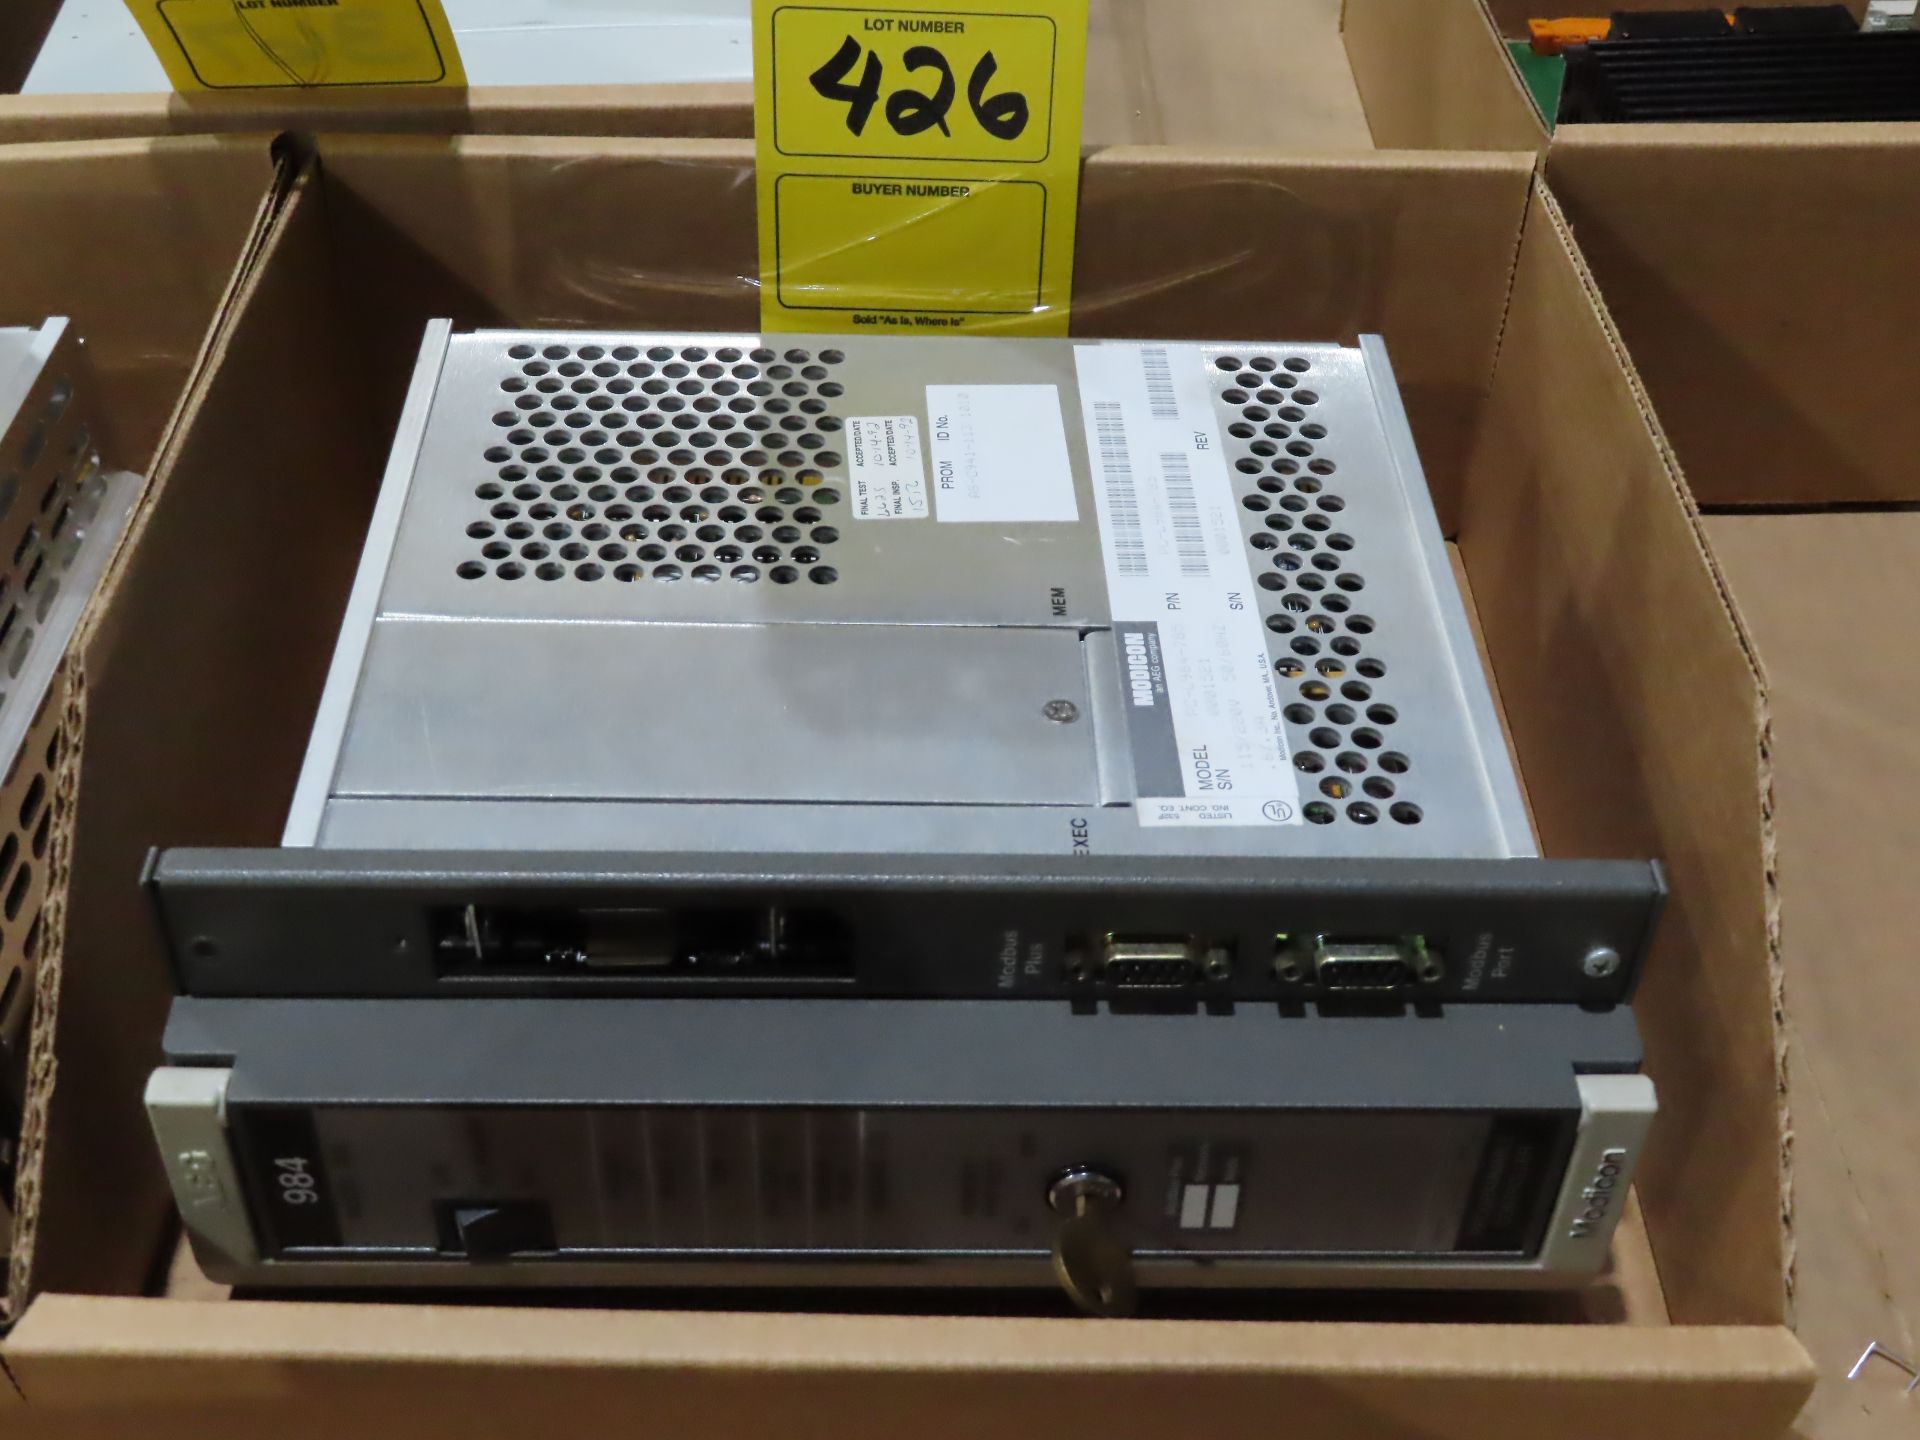 AEG modicon model PC-L984-785, as always, with Brolyn LLC auctions, all lots can be picked up from